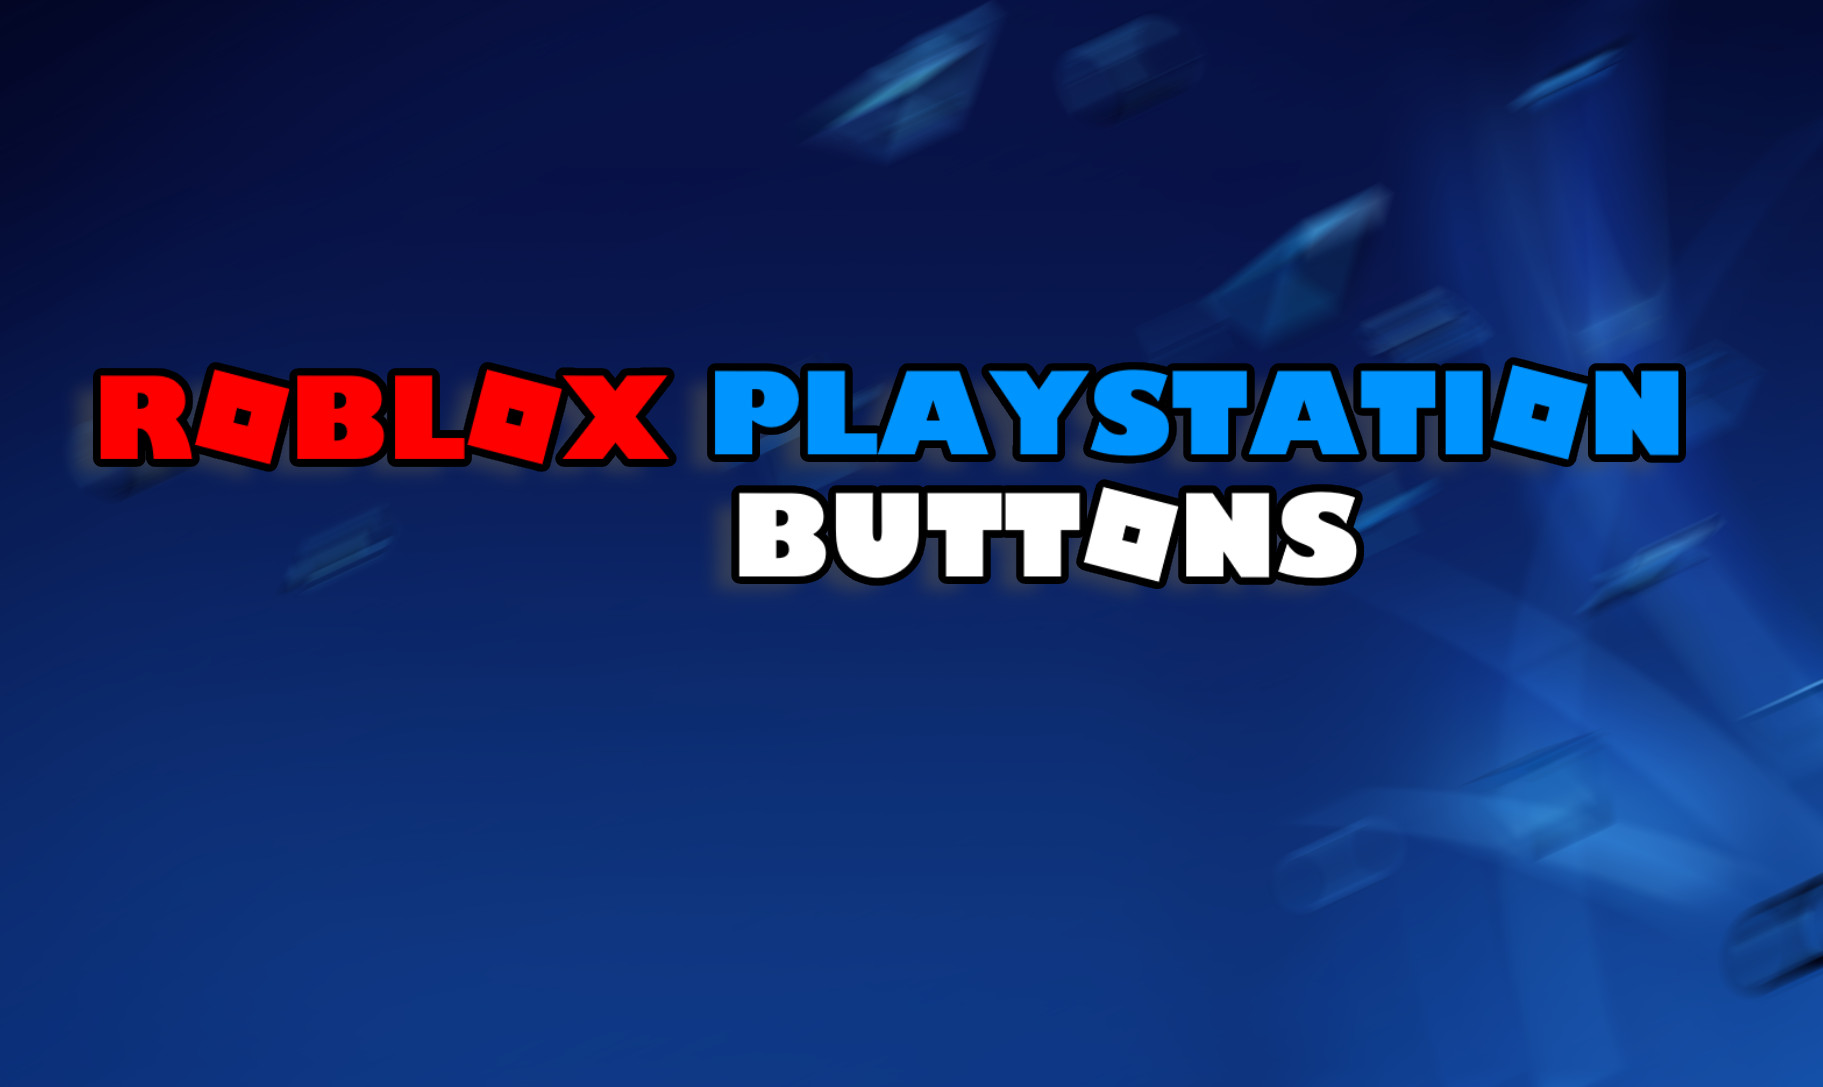 Playstation Buttons Replacing Xbox Buttons [Roblox] [Mods]